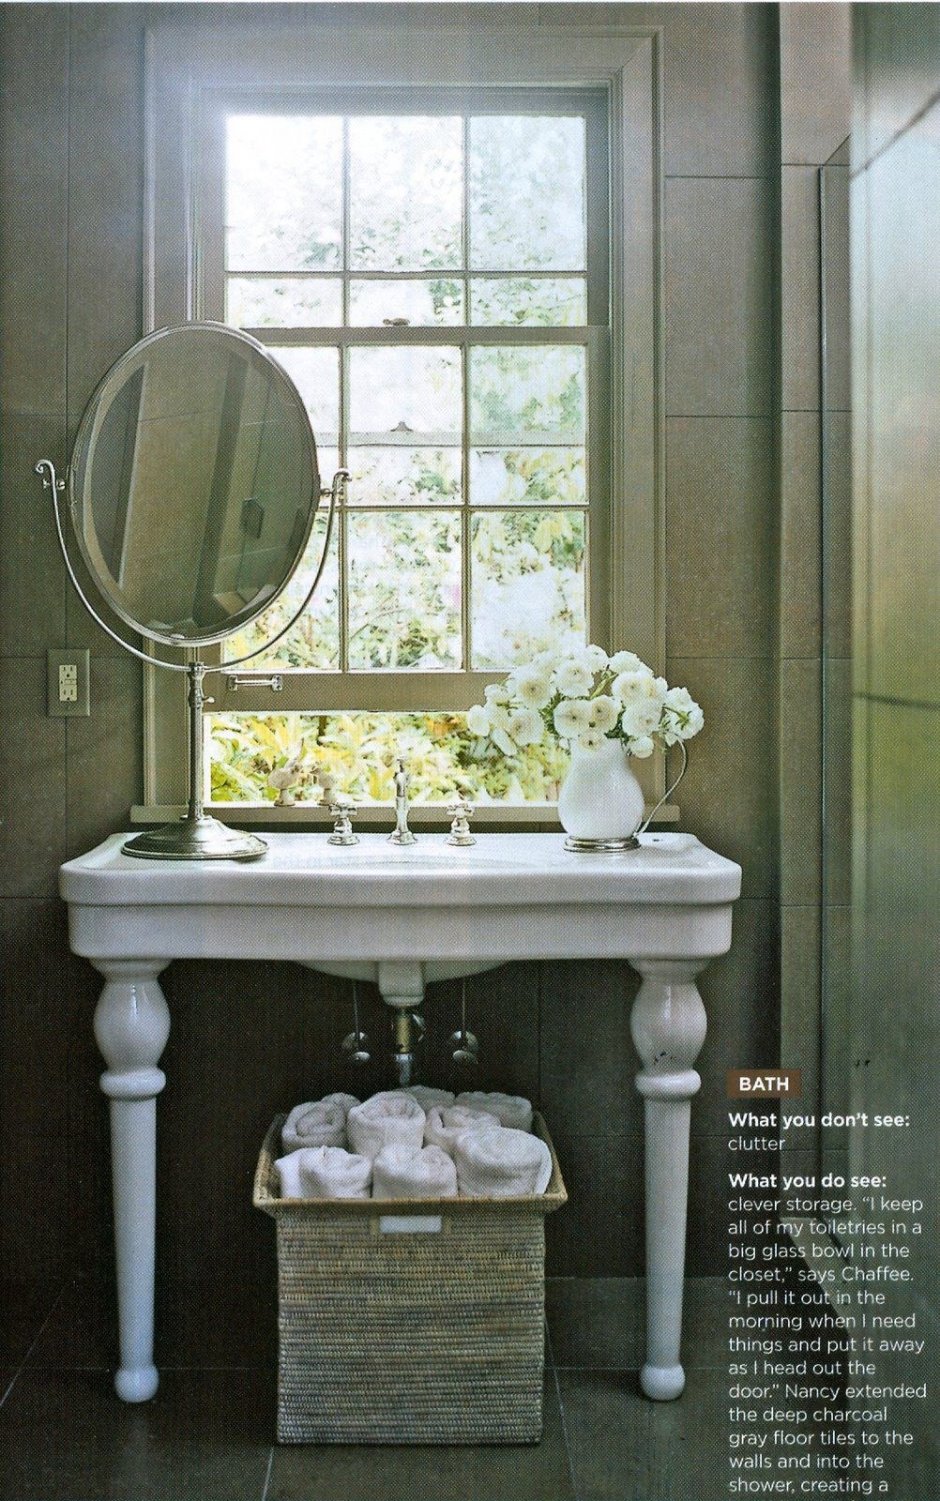 The Mirror is ___ the Sink.